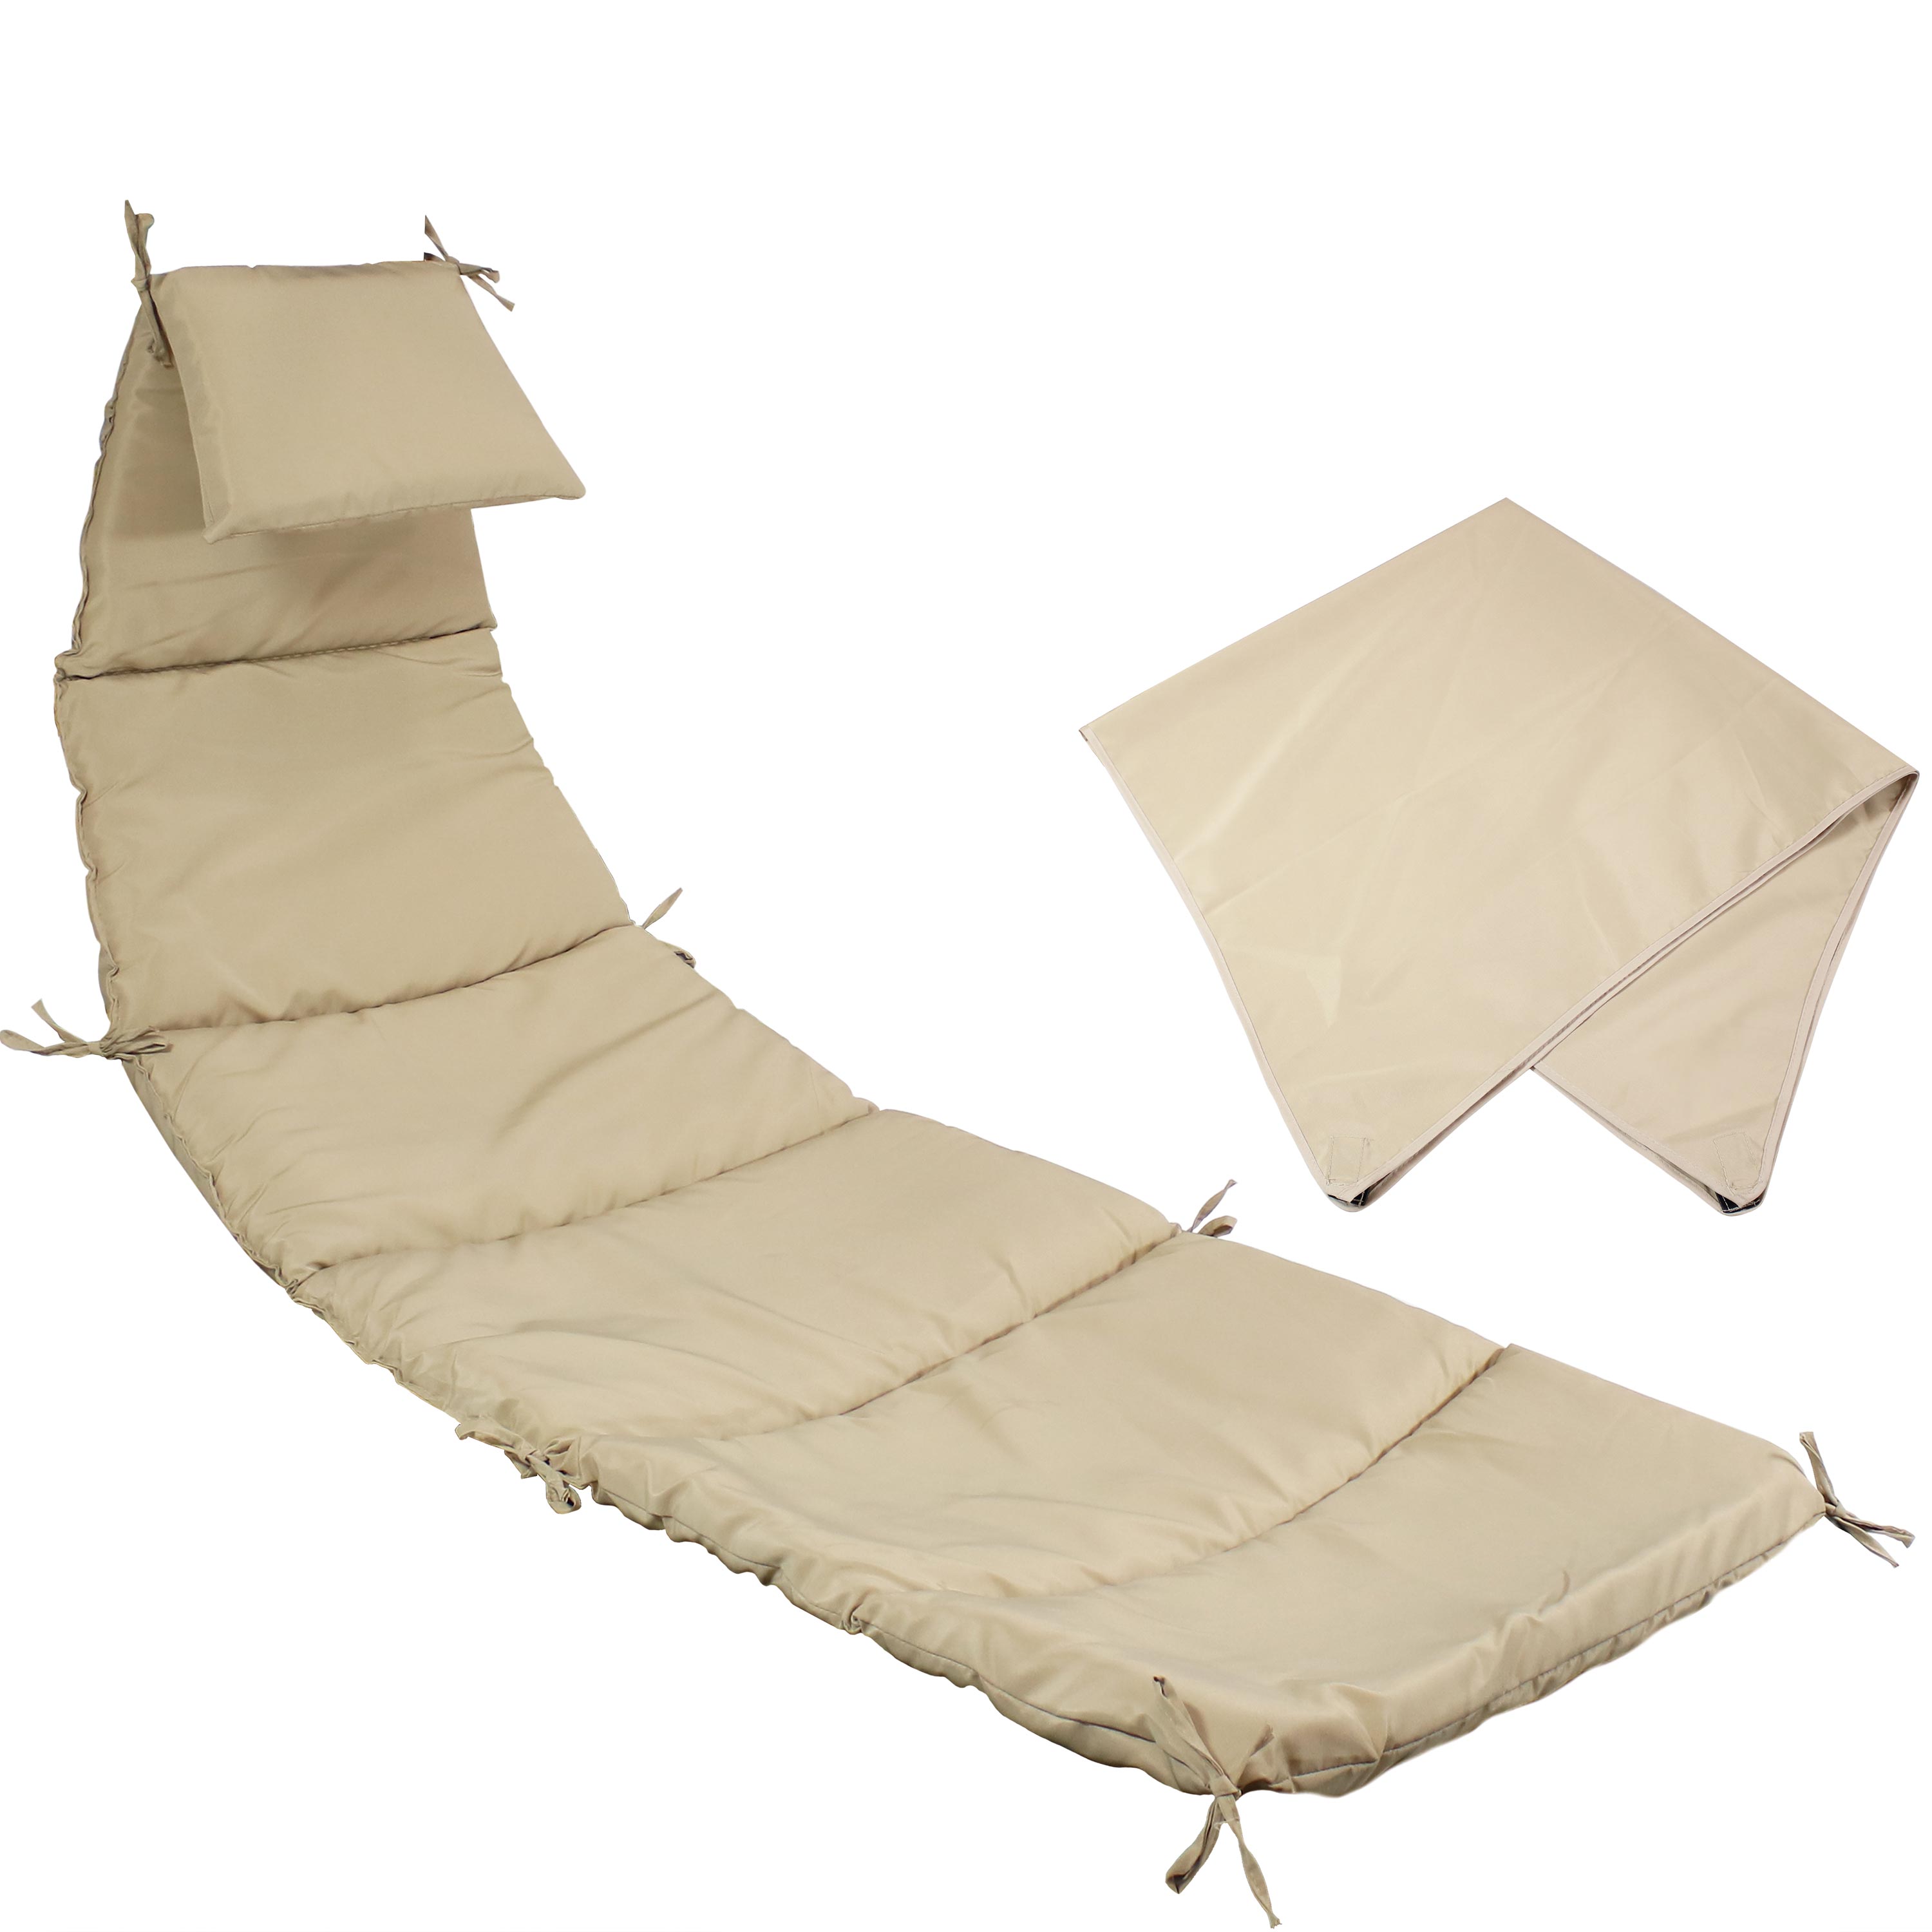 Outdoor Hanging Lounge Chair Replacement Cushion and Umbrella Fabric for Chaise Hanging Hammock Chair - image 1 of 3